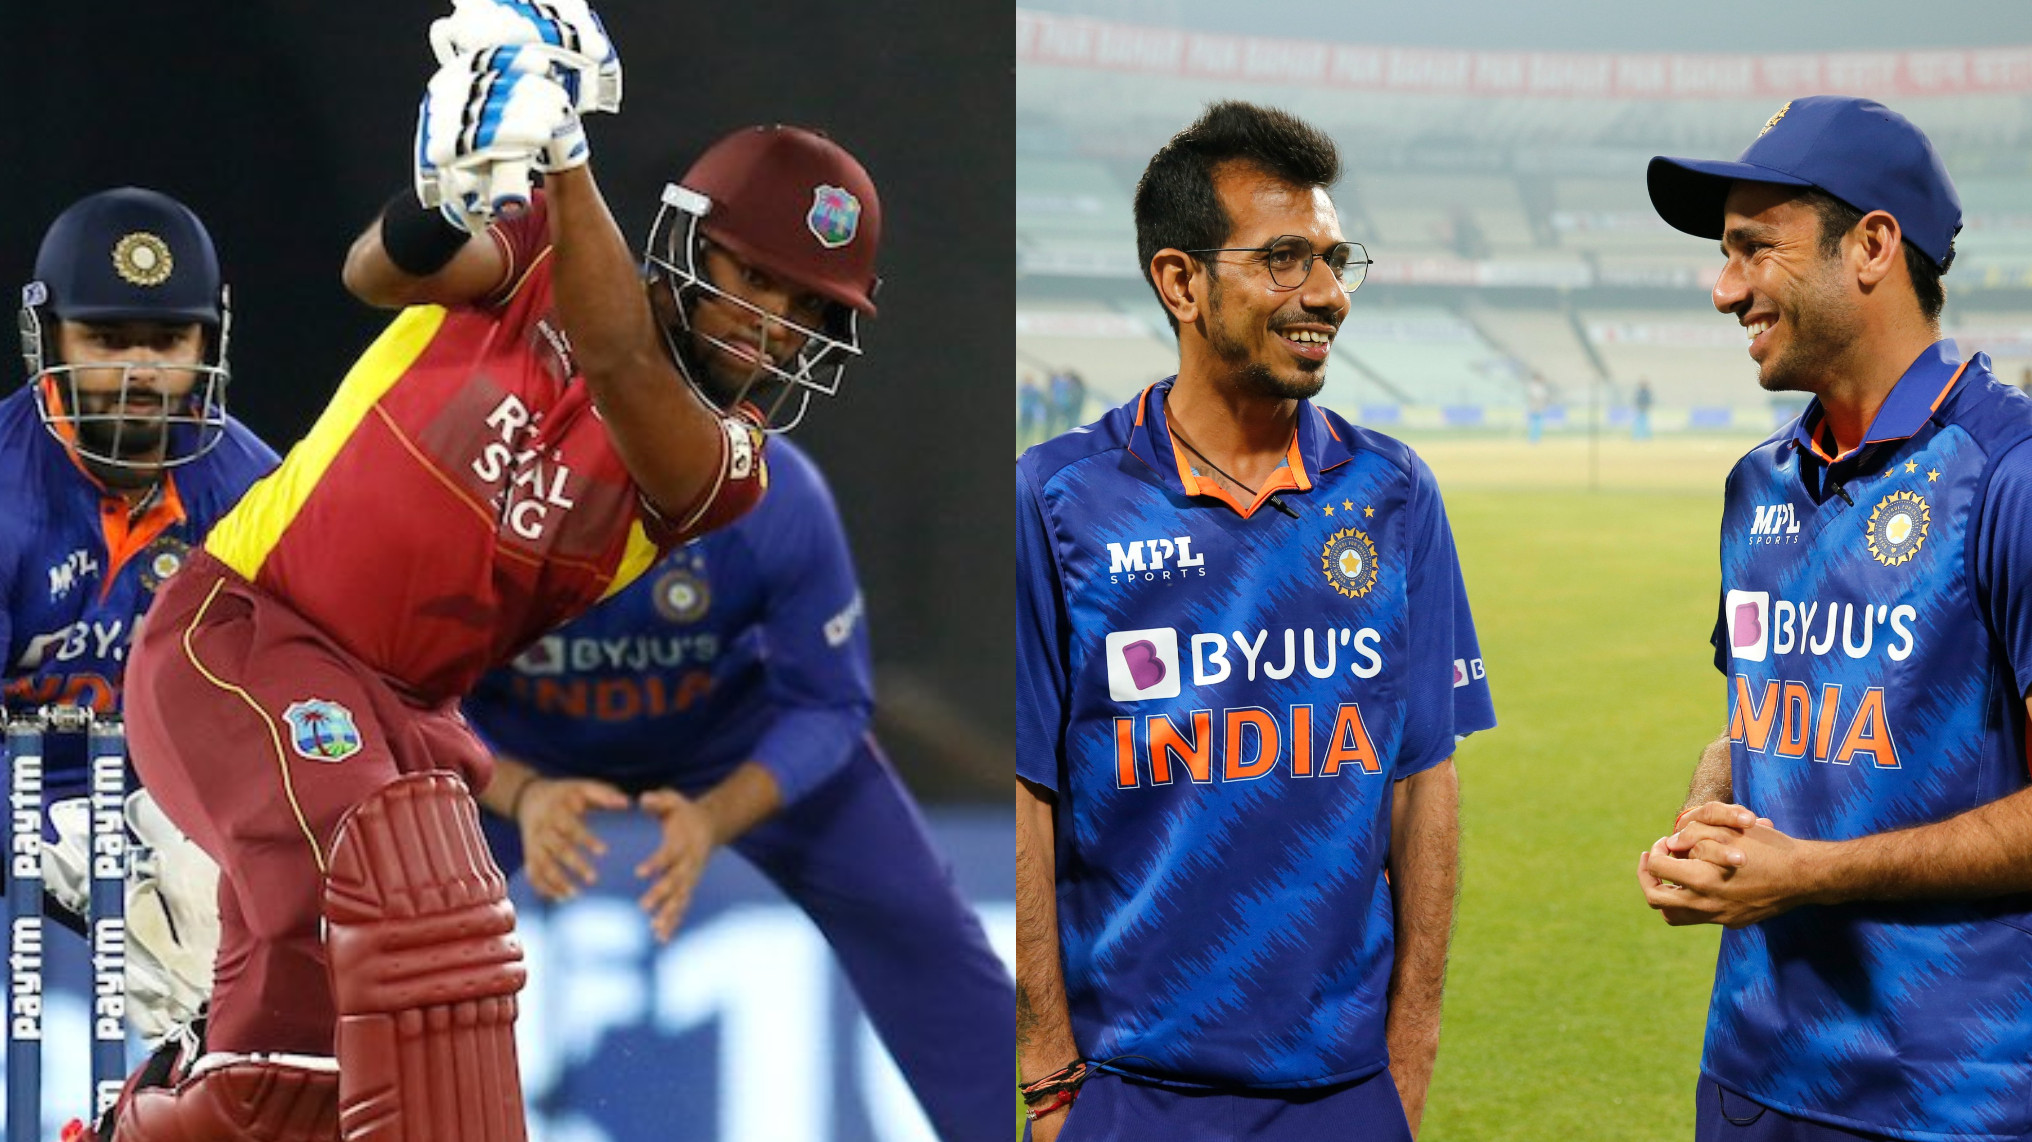 IND v WI 2022: We were in two minds against Indian spinners- Nicholas Pooran after loss in 1st T20I to India